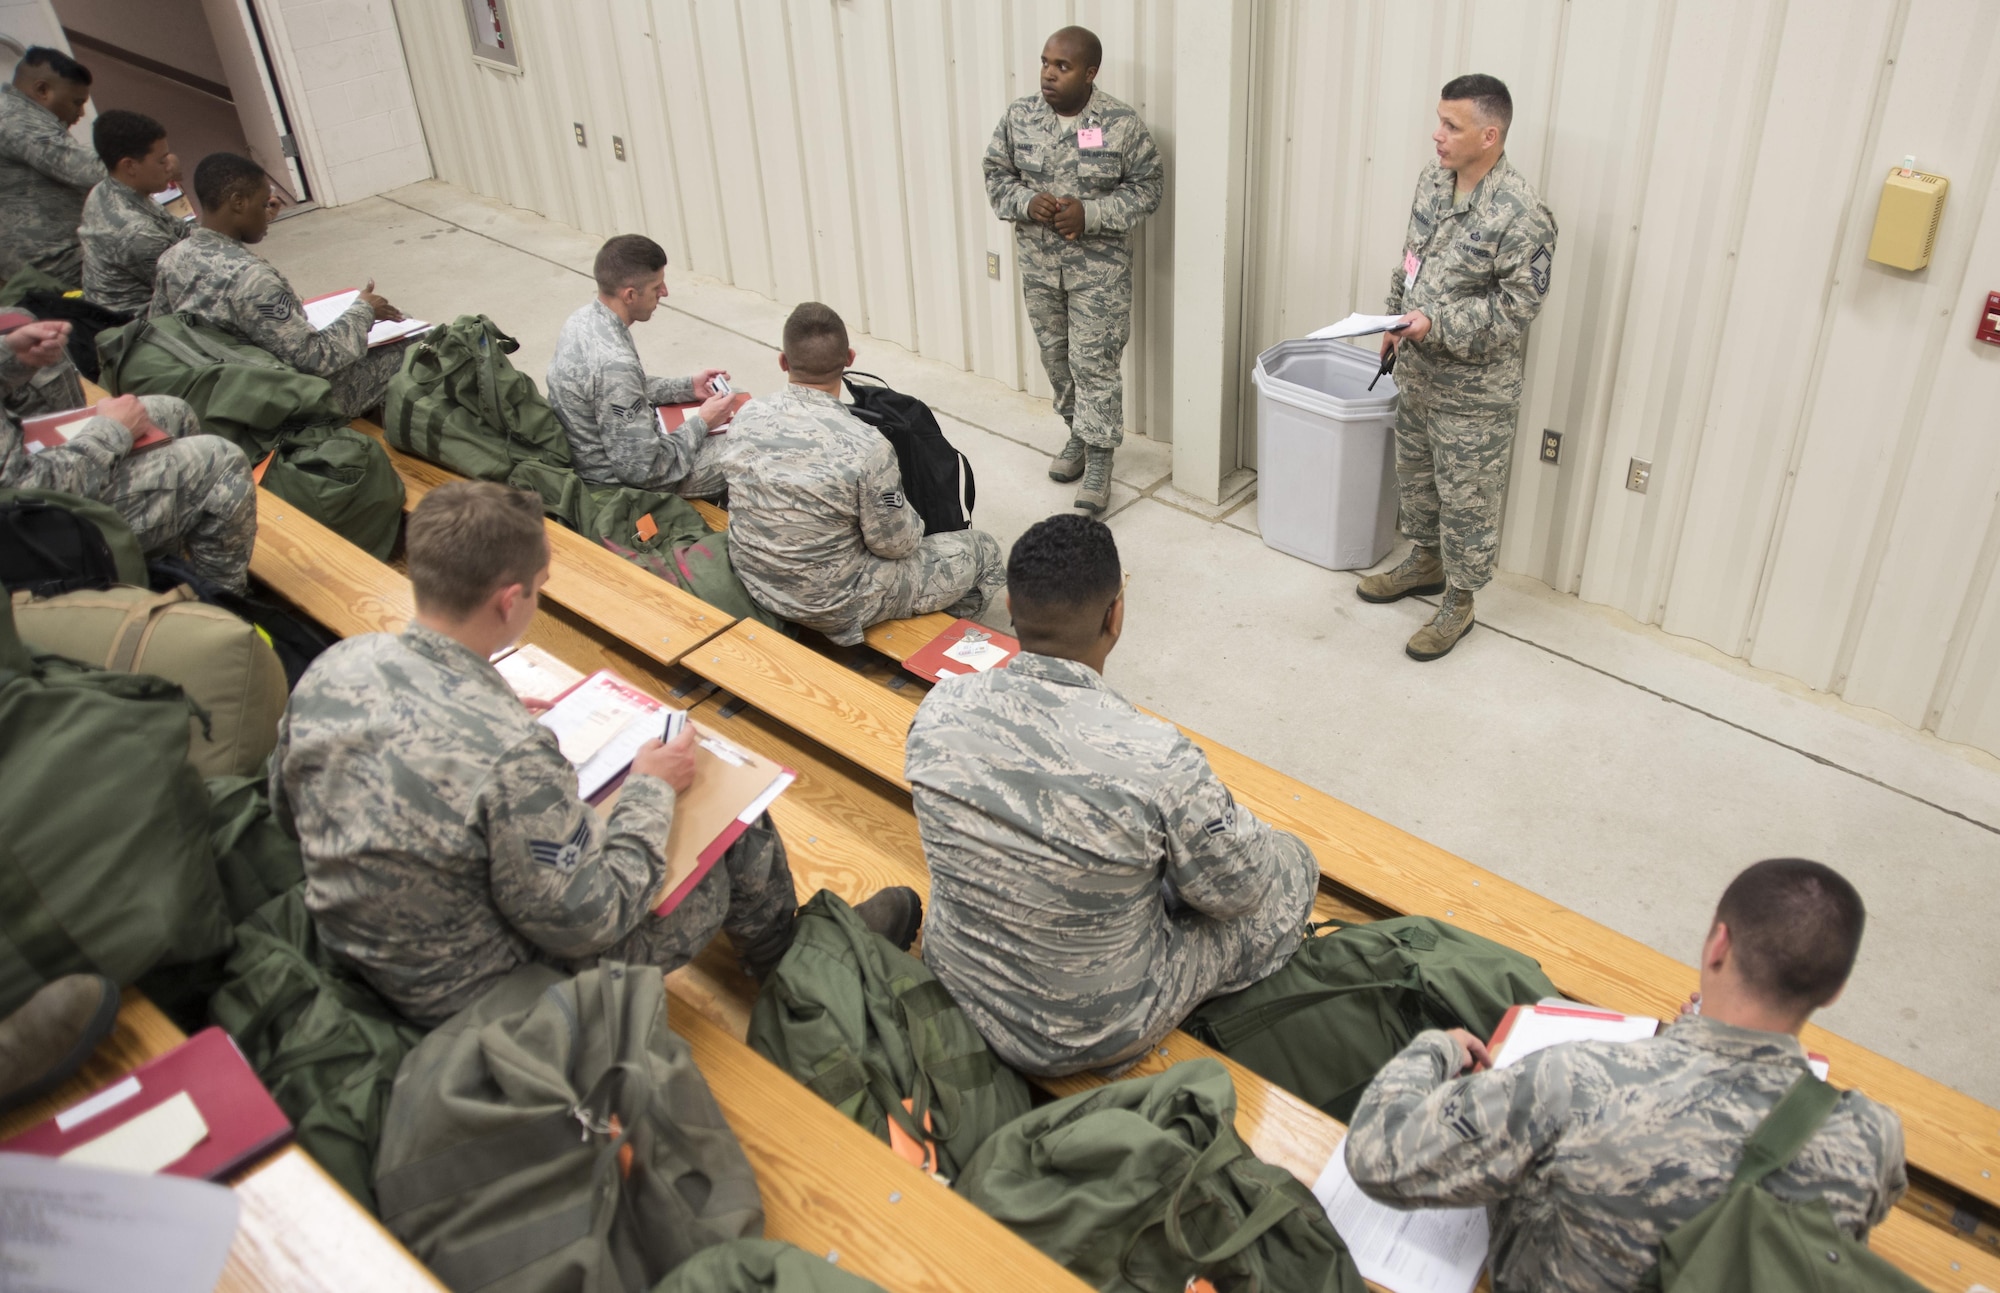 Senior Master Sgt. Virgil McCullough, 4th Force Support Squadron manpower and personnel superintendent, briefs deployers at the PDF processing center July 20, 2017, at Seymour Johnson Air Force Base, North Carolina. The pre-deployment processing was to ensure the deployers had all necessary documents and gear to prior to departing. (U.S. Air Force photo by Tech. Sgt. David W. Carbajal)